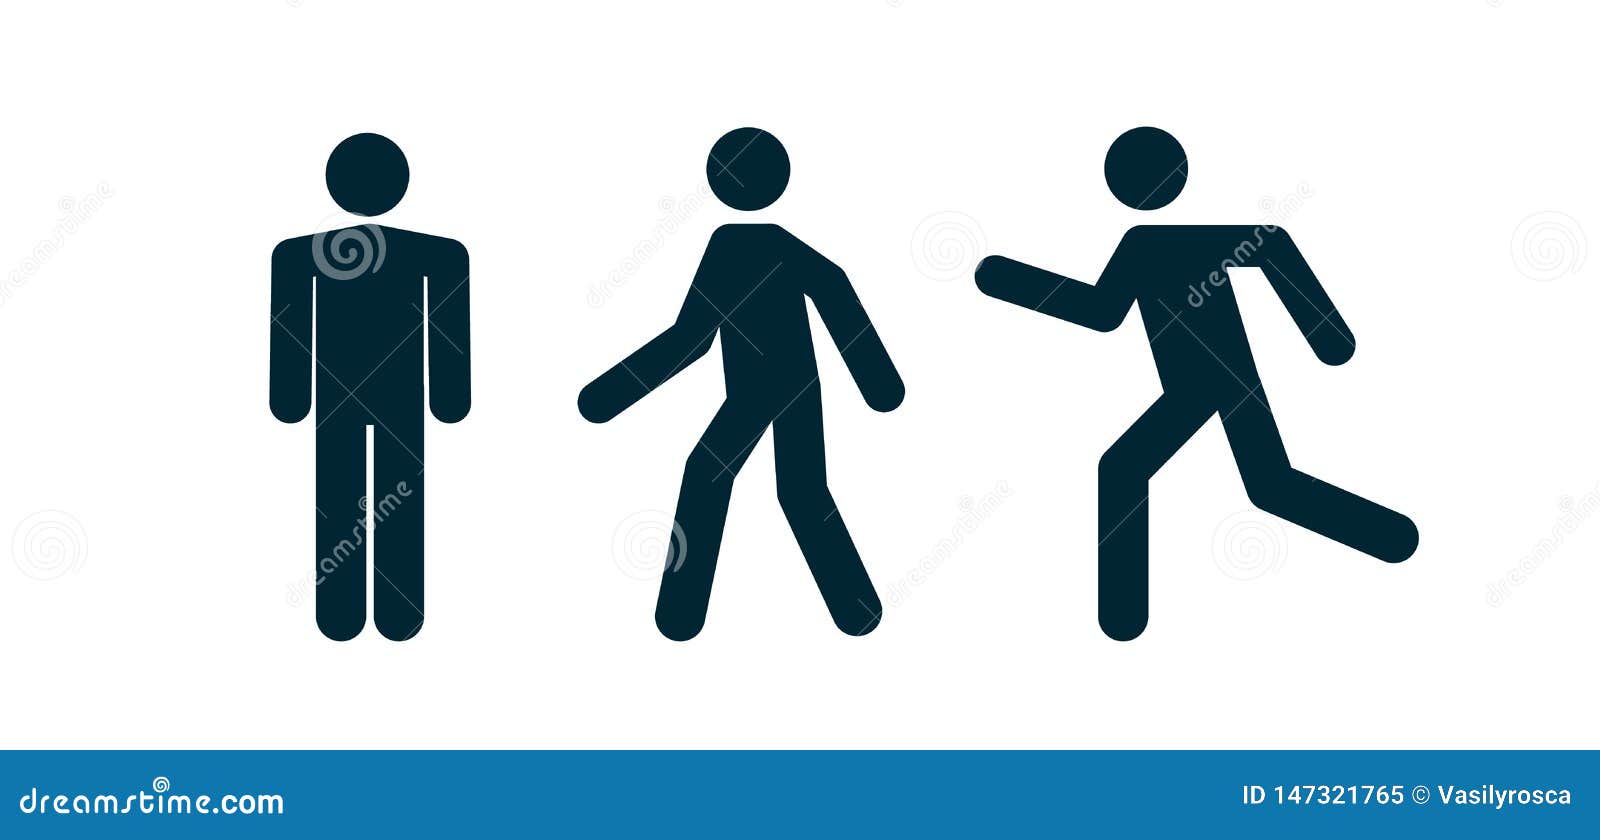 man stand walk and run pictogram icon. man pedestrian sign people and road traffic  silhouette